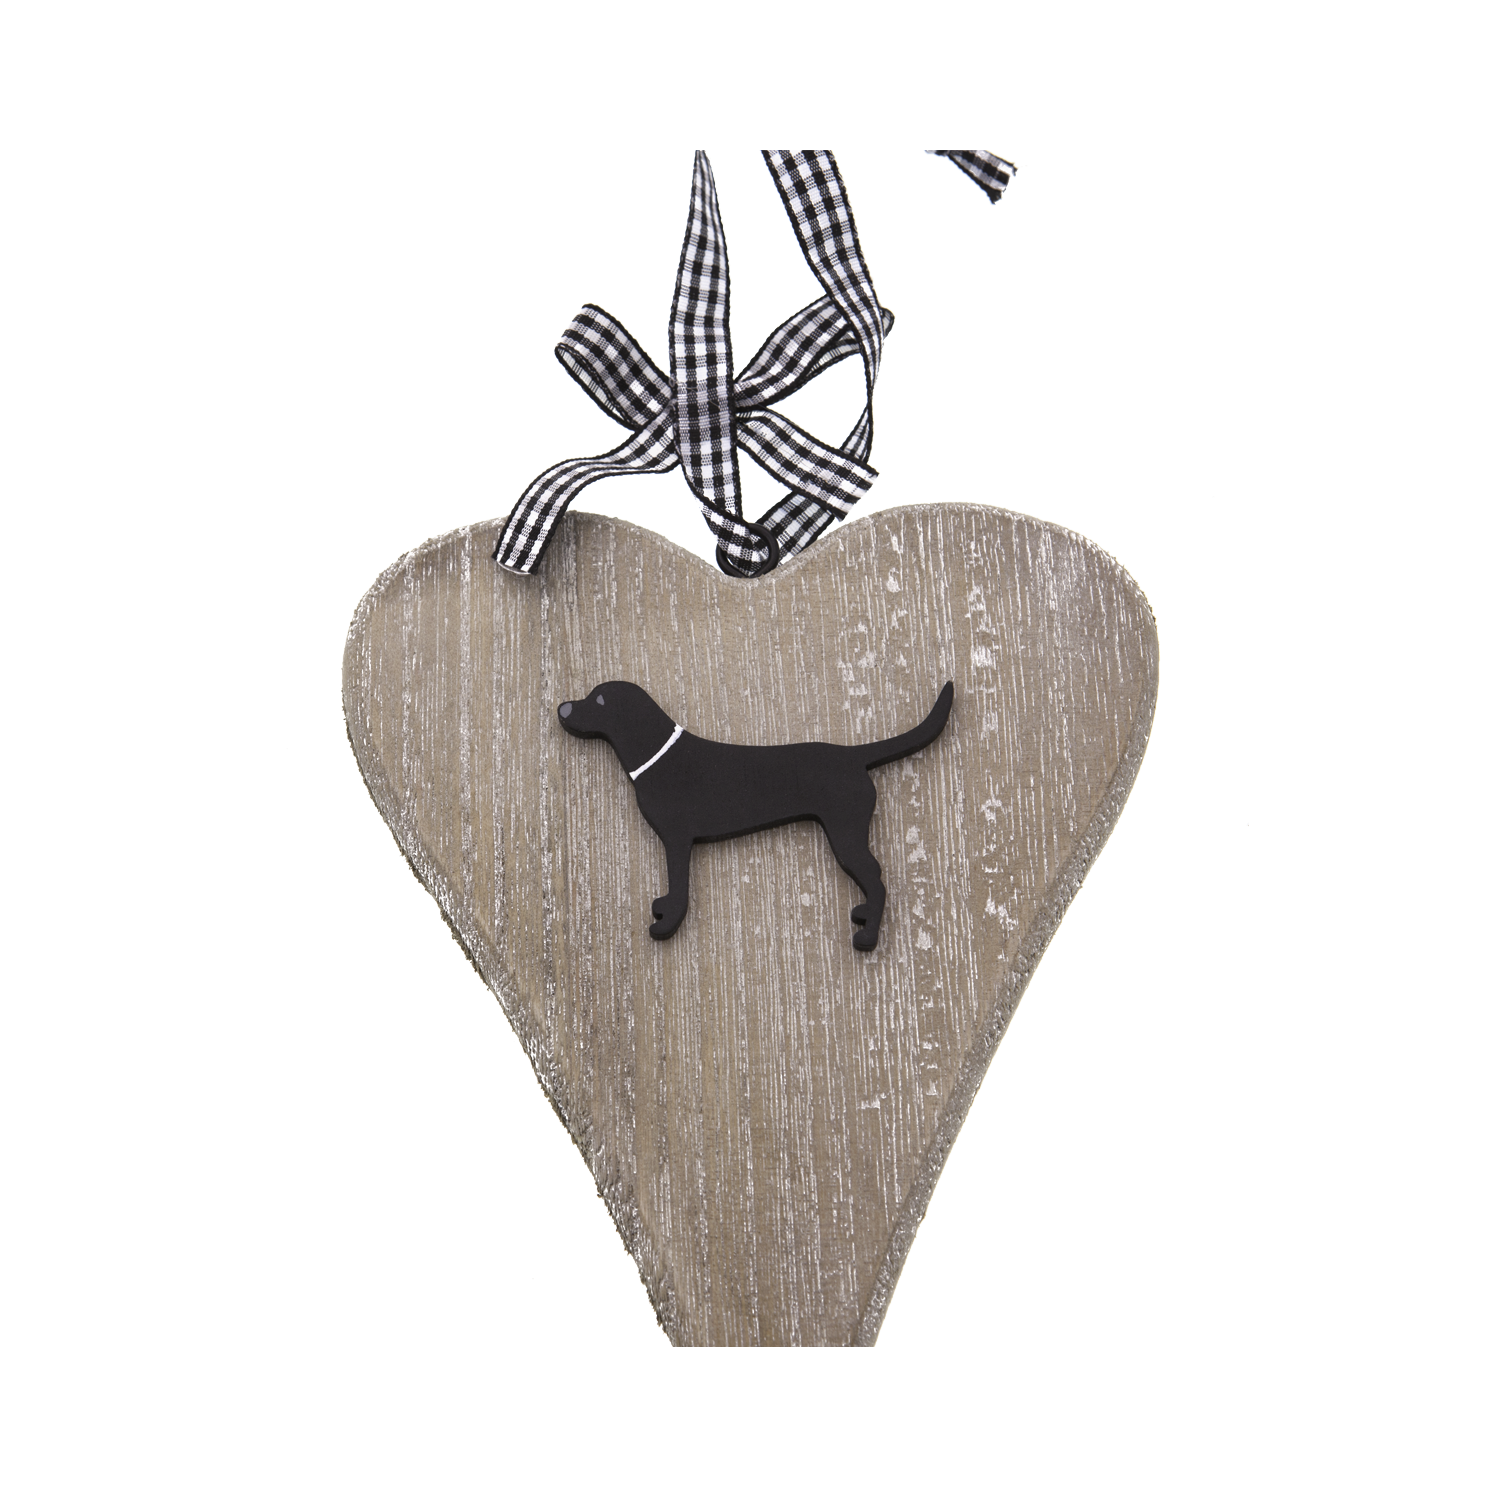 Dog Lover Gifts available at Dog Krazy Gifts – Bailey & Friends shabby chic wooden heart. For the Love of Labradors